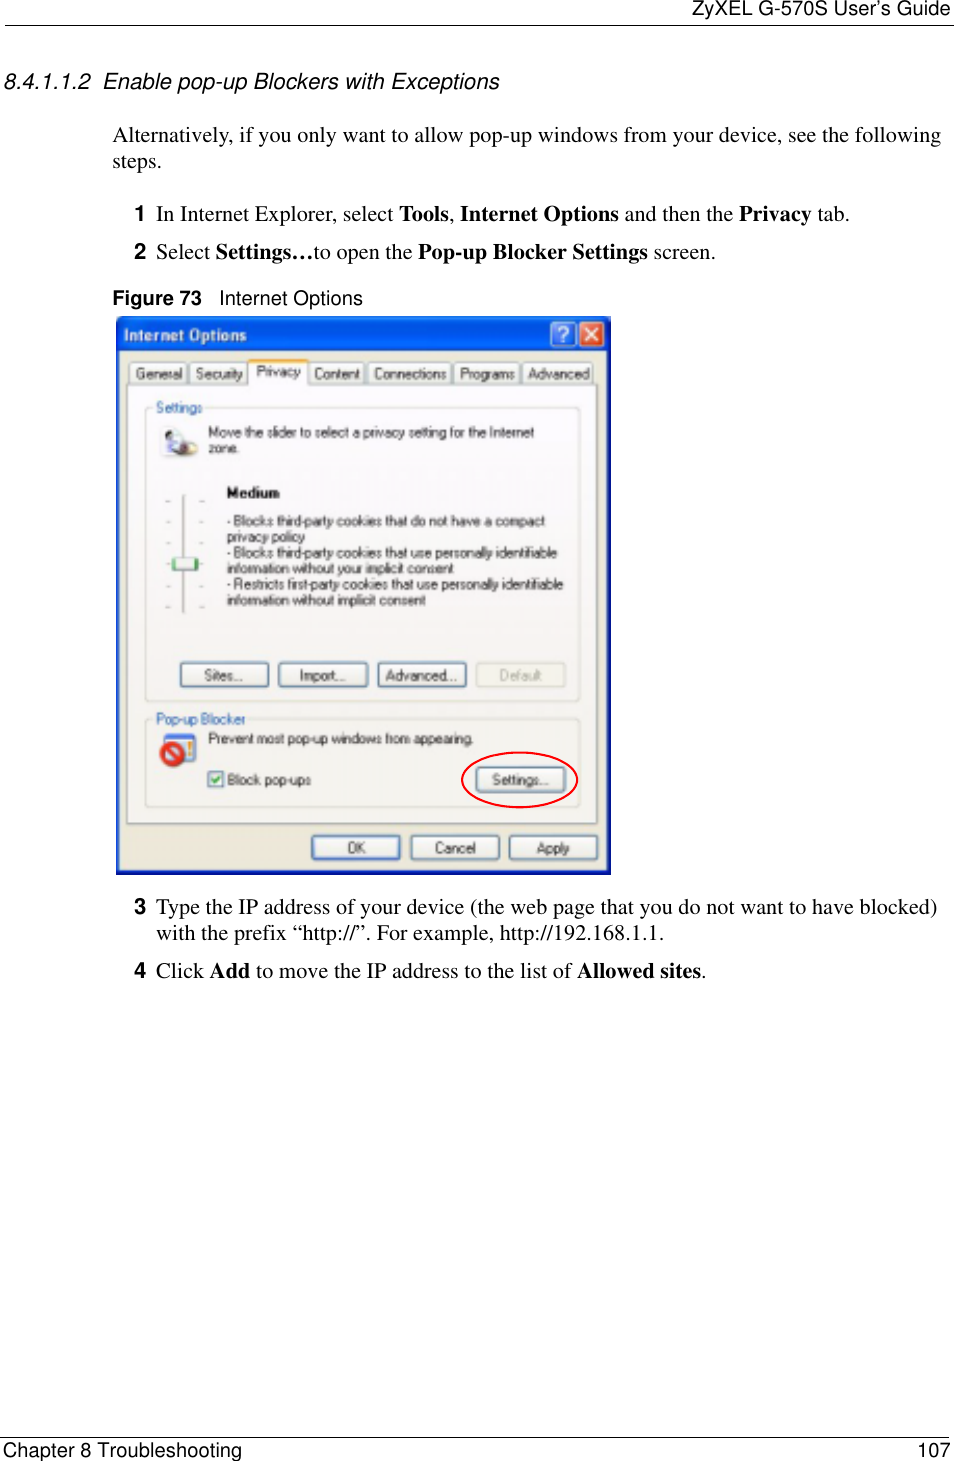 ZyXEL G-570S User’s GuideChapter 8 Troubleshooting 1078.4.1.1.2  Enable pop-up Blockers with ExceptionsAlternatively, if you only want to allow pop-up windows from your device, see the following steps.1In Internet Explorer, select Tools,Internet Options and then the Privacy tab. 2Select Settings…to open the Pop-up Blocker Settings screen.Figure 73   Internet Options3Type the IP address of your device (the web page that you do not want to have blocked) with the prefix “http://”. For example, http://192.168.1.1. 4Click Add to move the IP address to the list of Allowed sites.